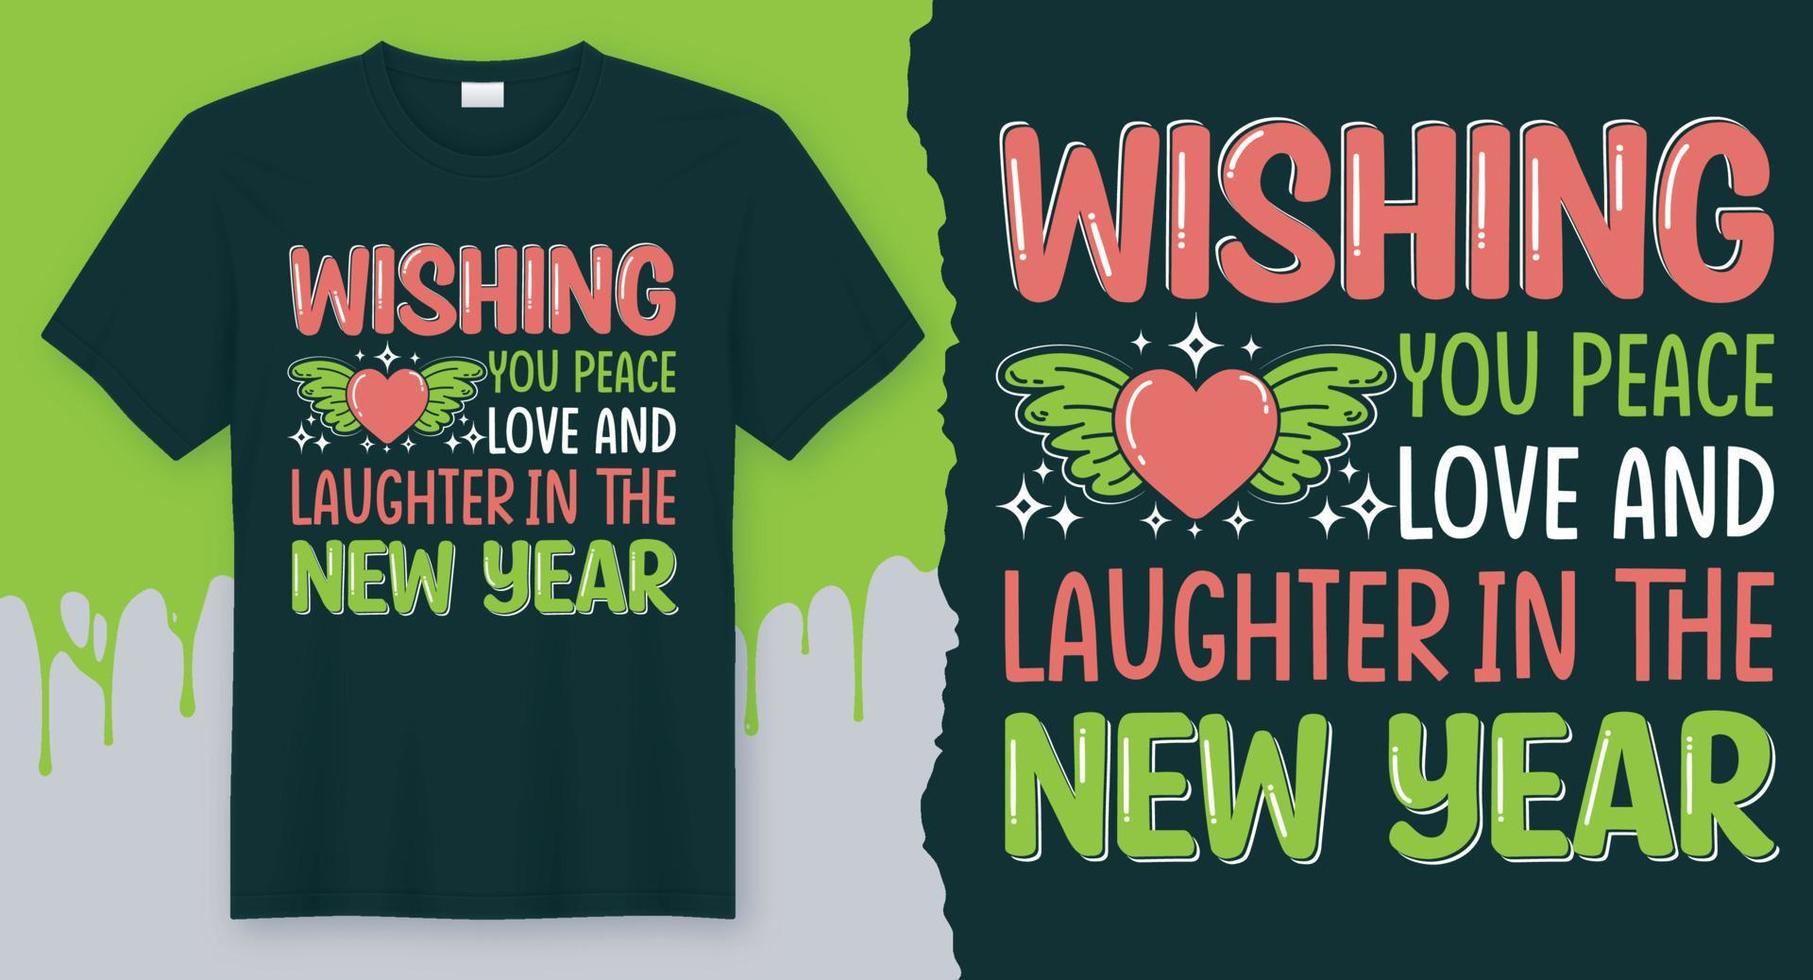 Wishing you peace love and laughter in the new year. Best Vector Design for New year T-Shirt